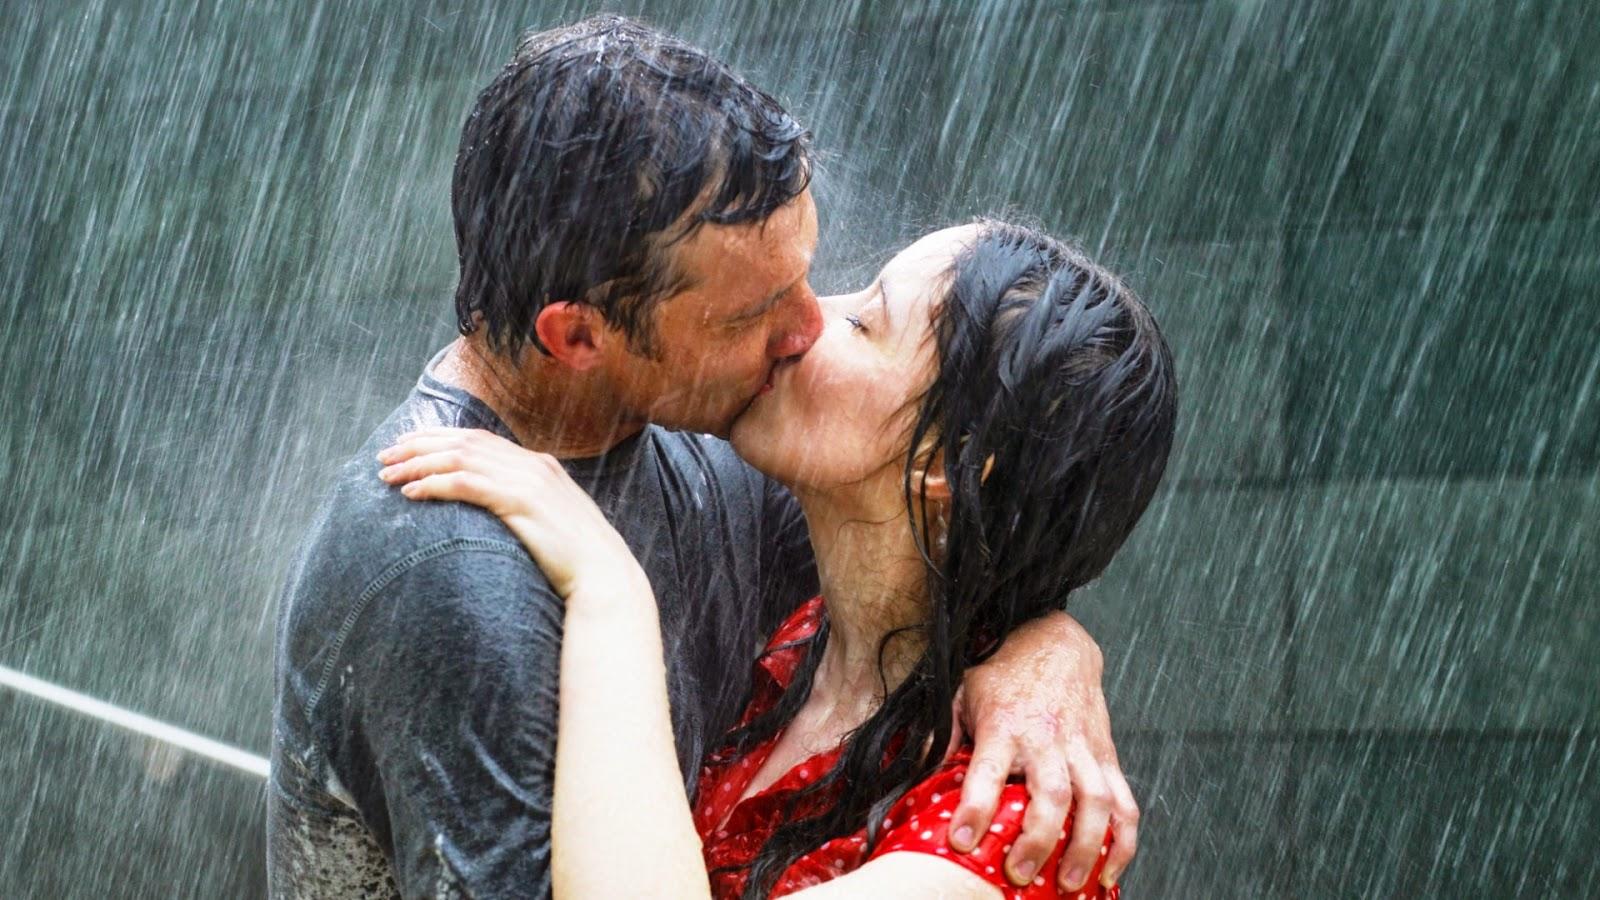 Passion in the Rain - Married sex stories - erotica hq nude image